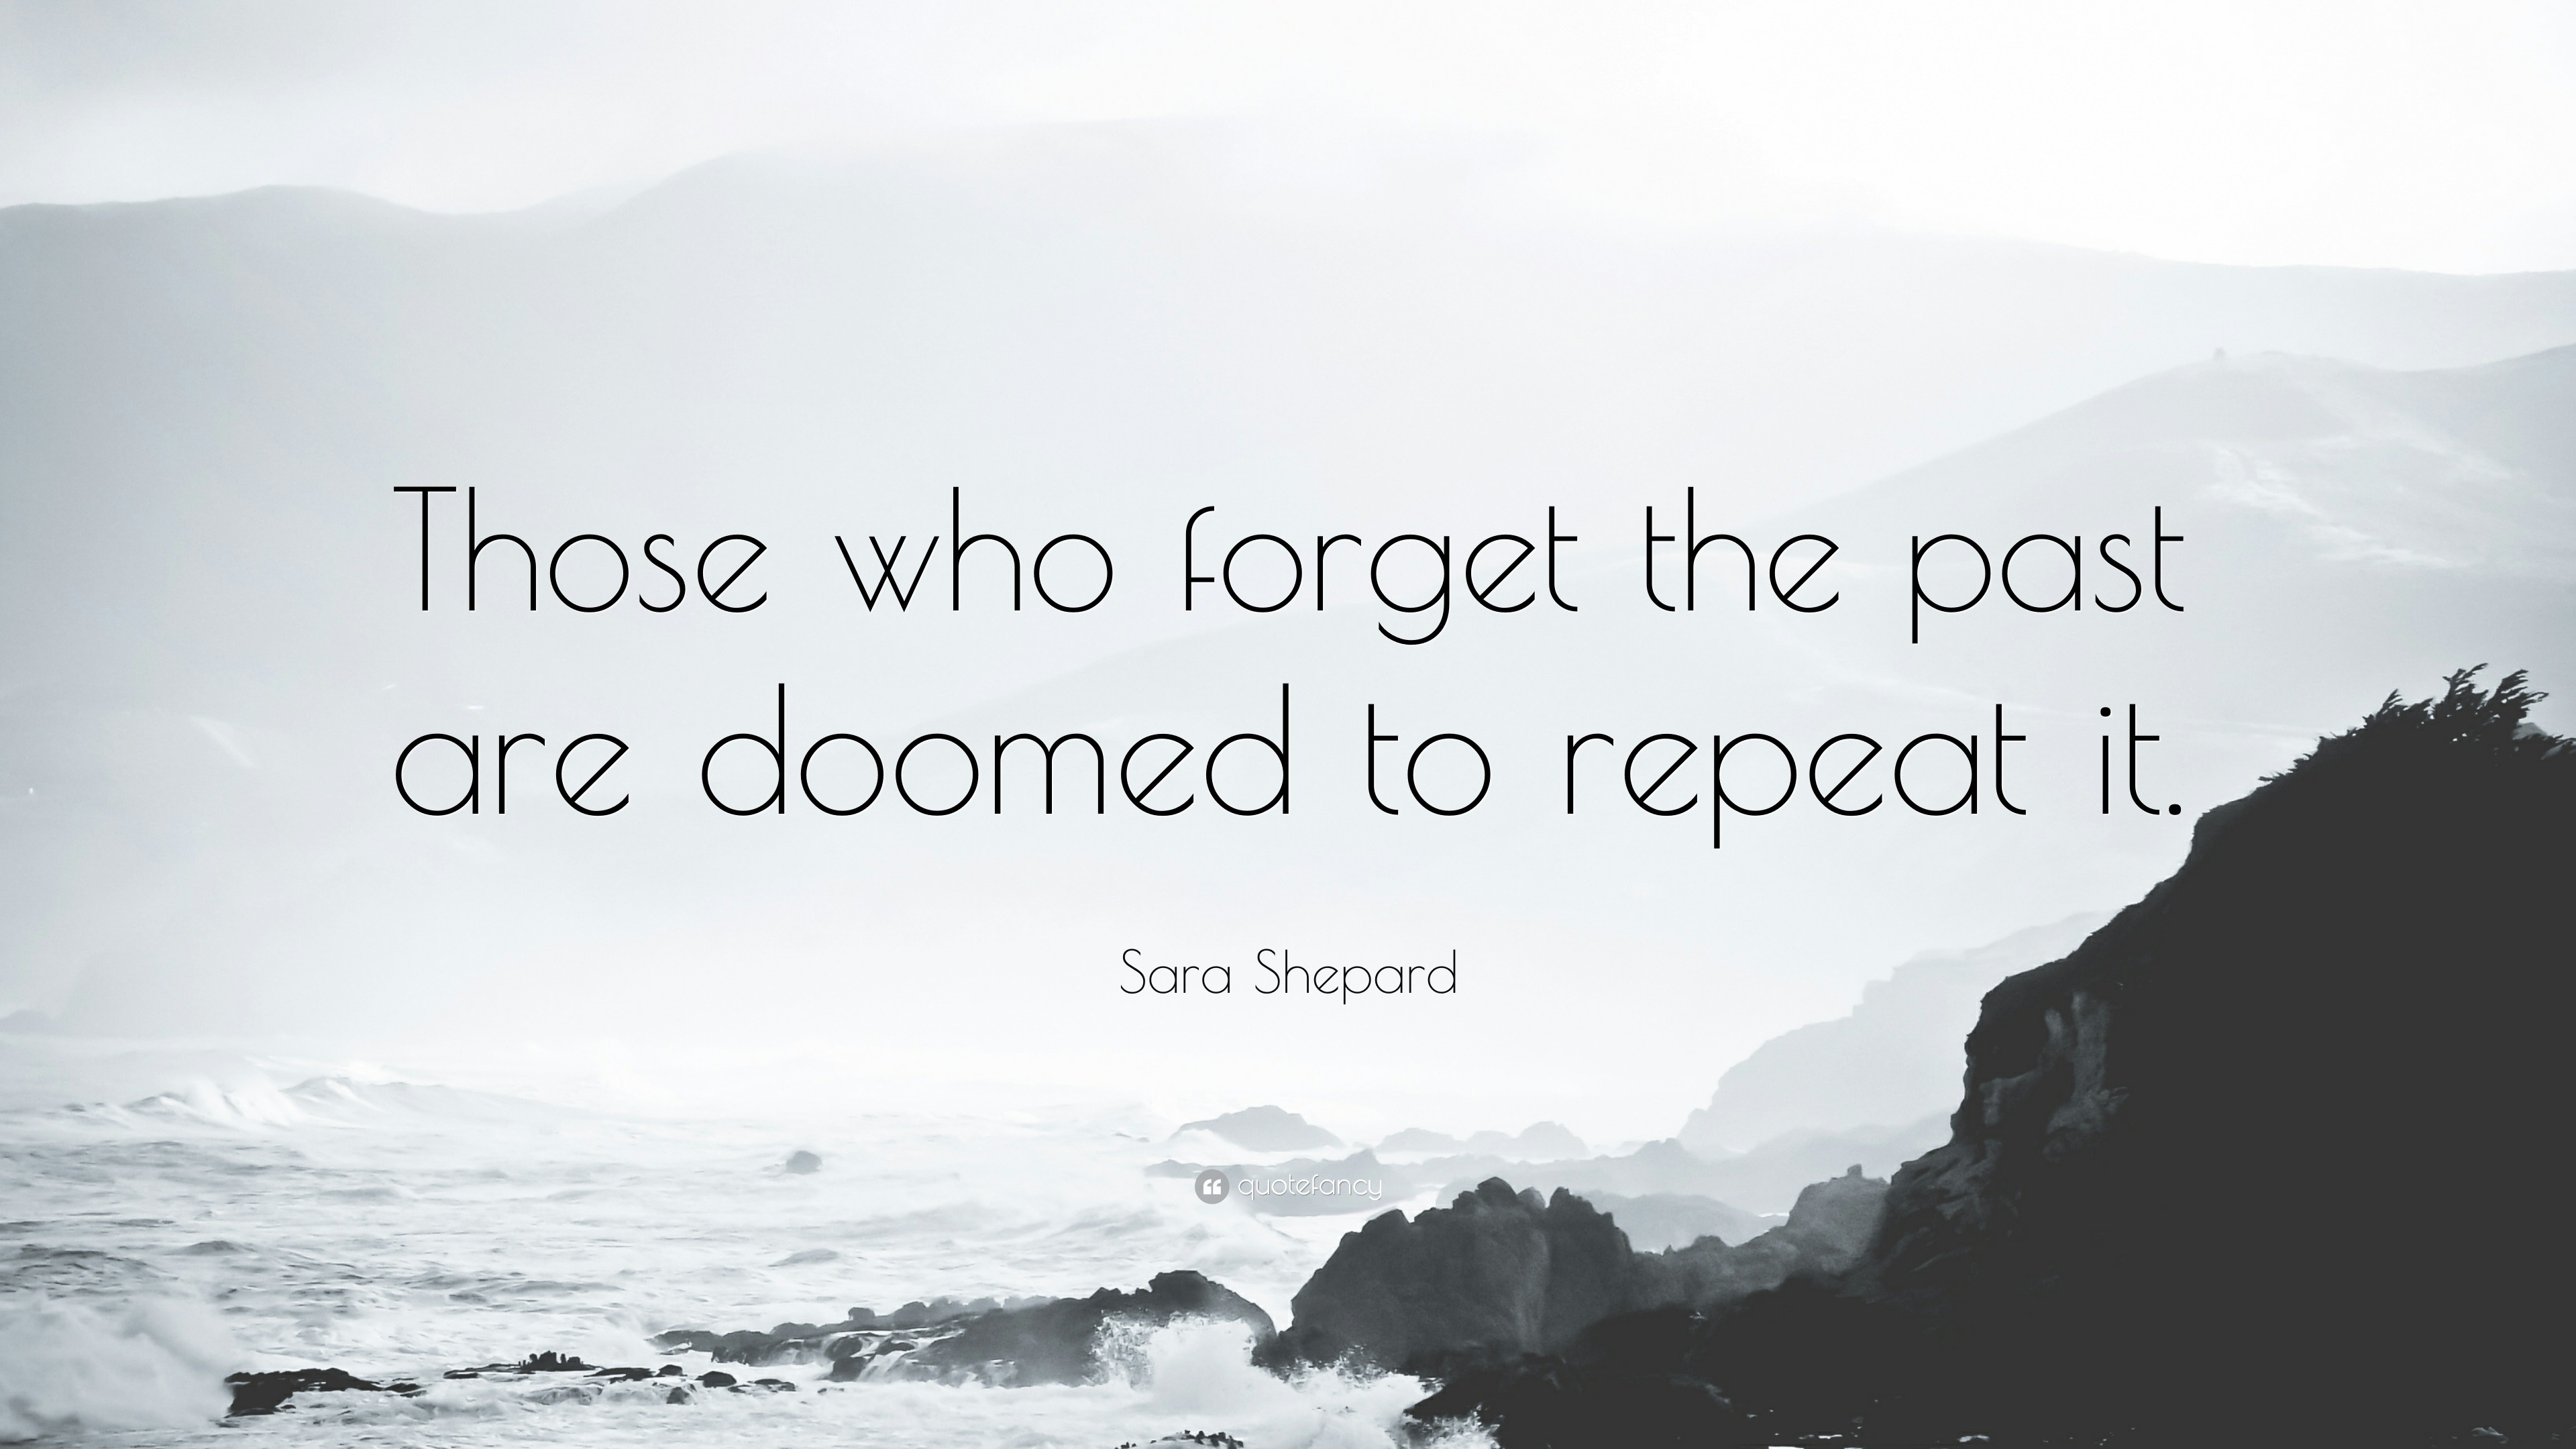 359342-Sara-Shepard-Quote-Those-who-forget-the-past-are-doomed-to-repeat.jpg